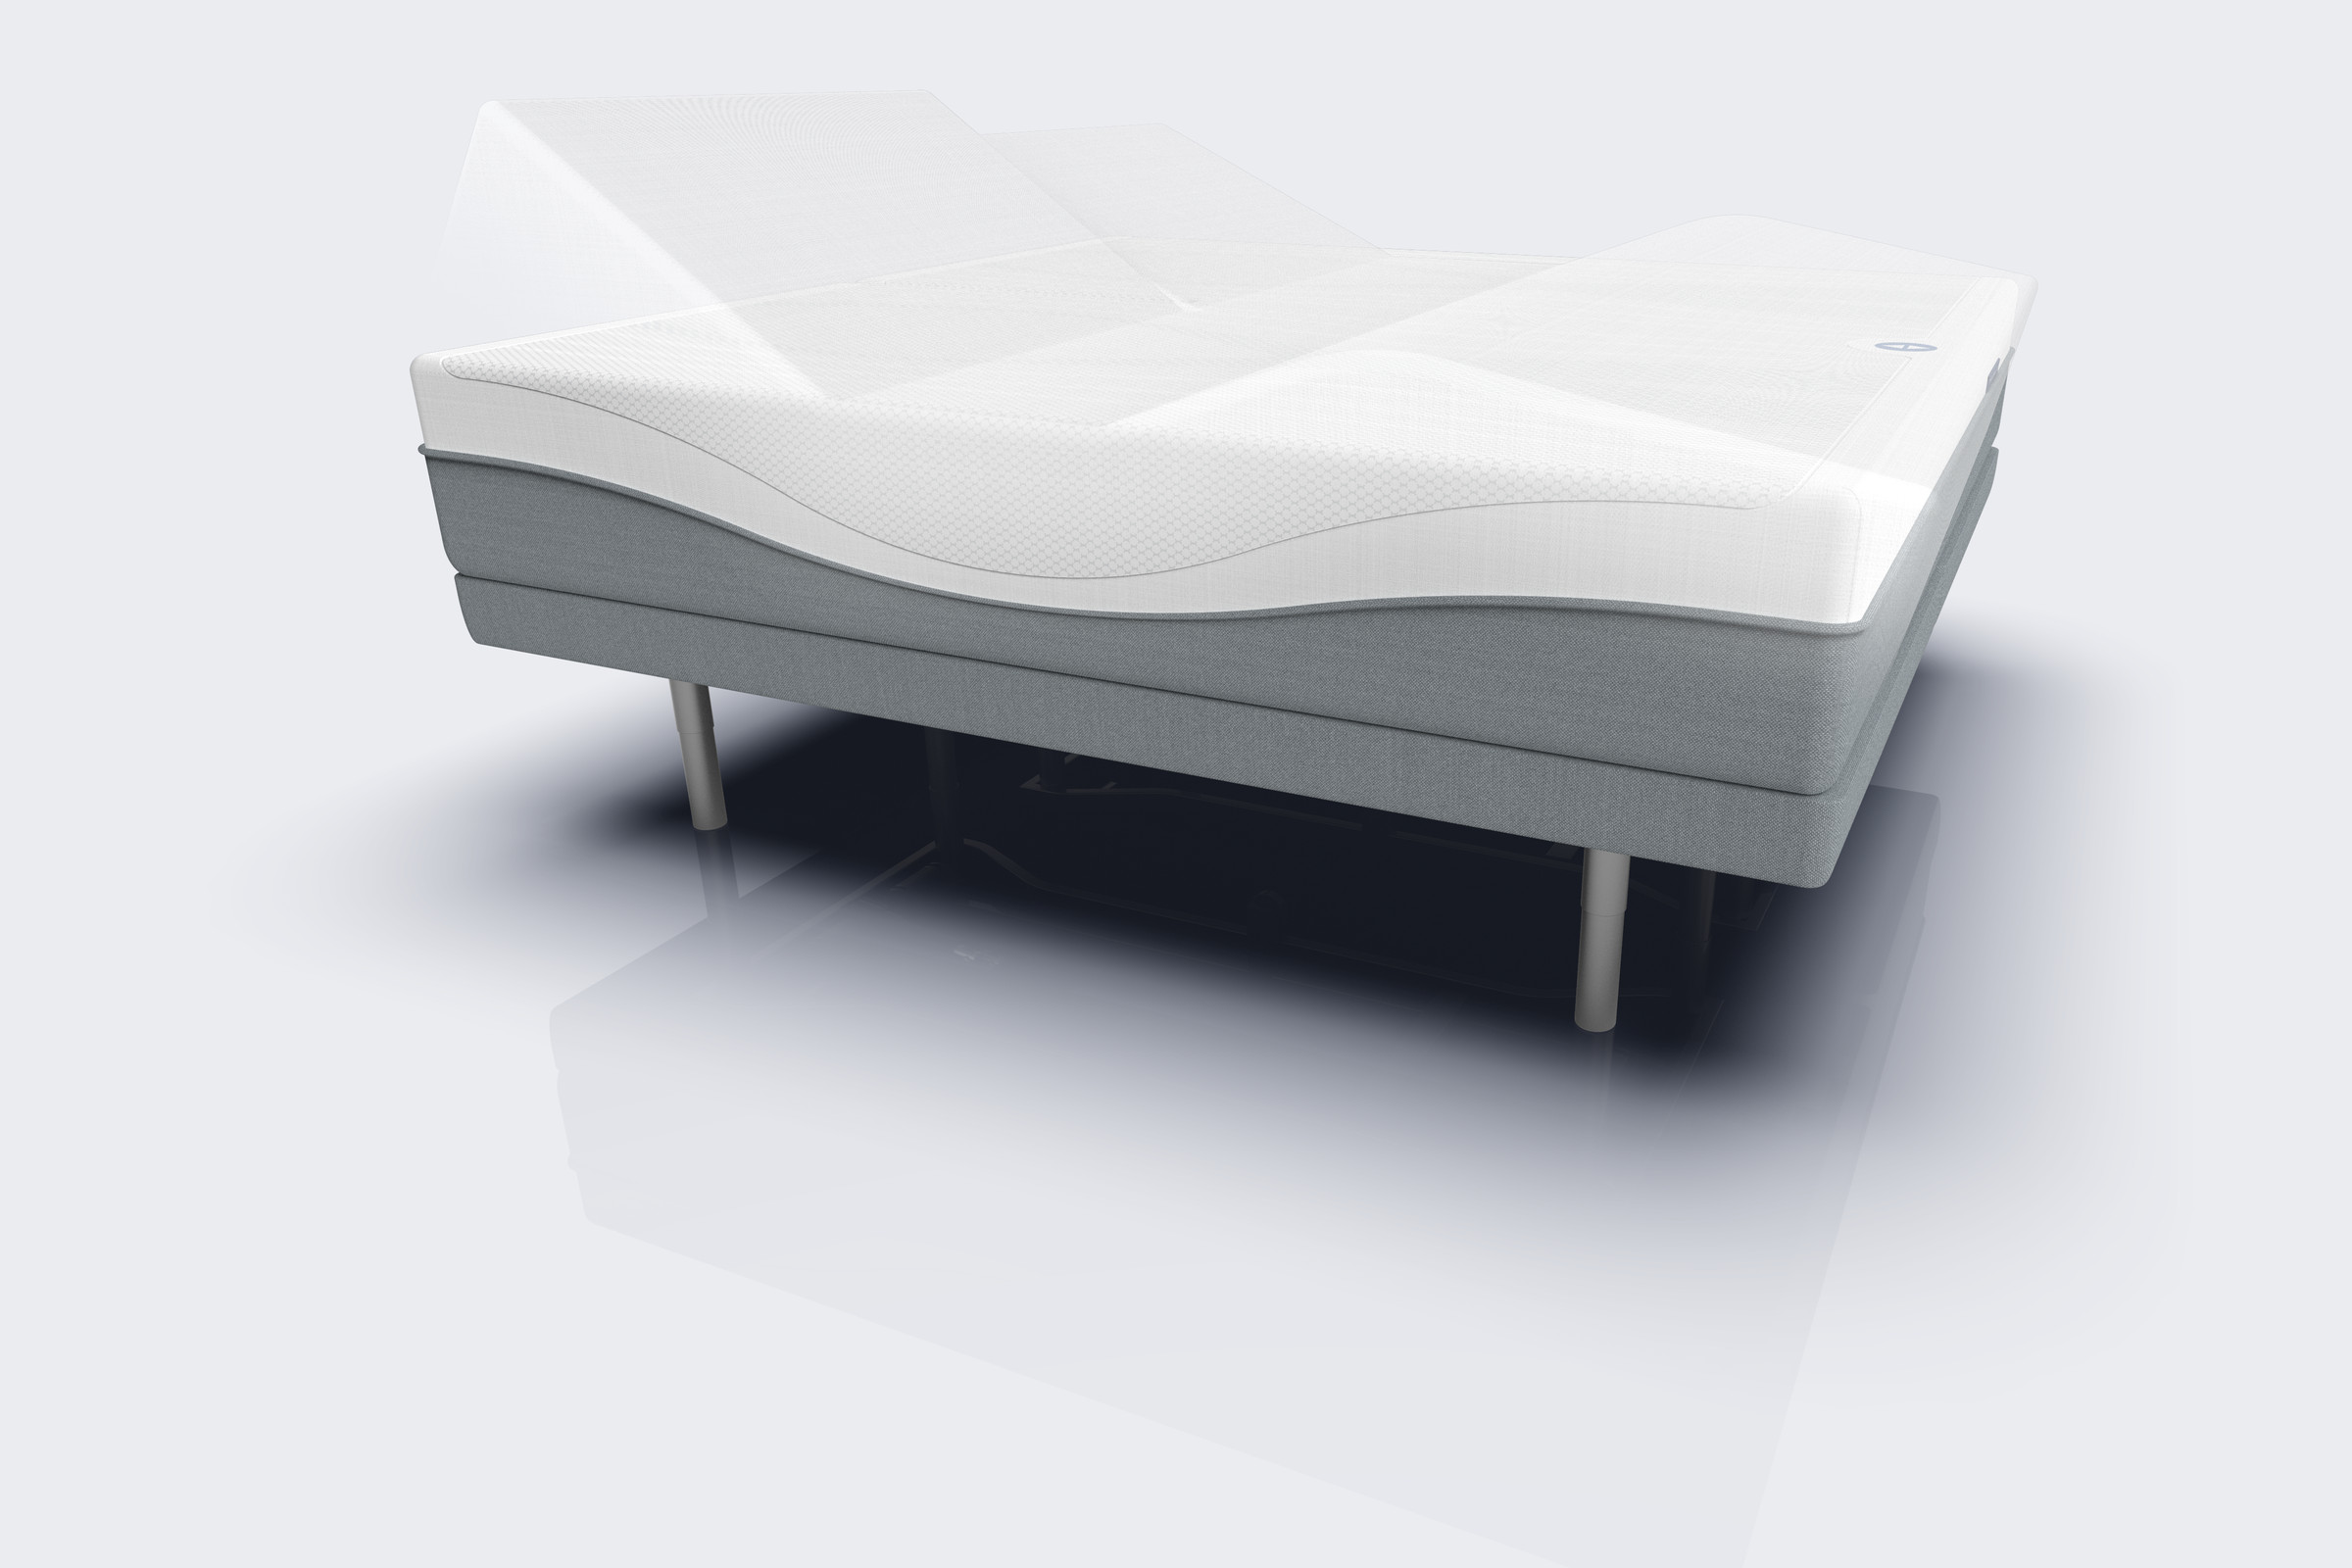 A render of the Sleep Number 360 smart bed